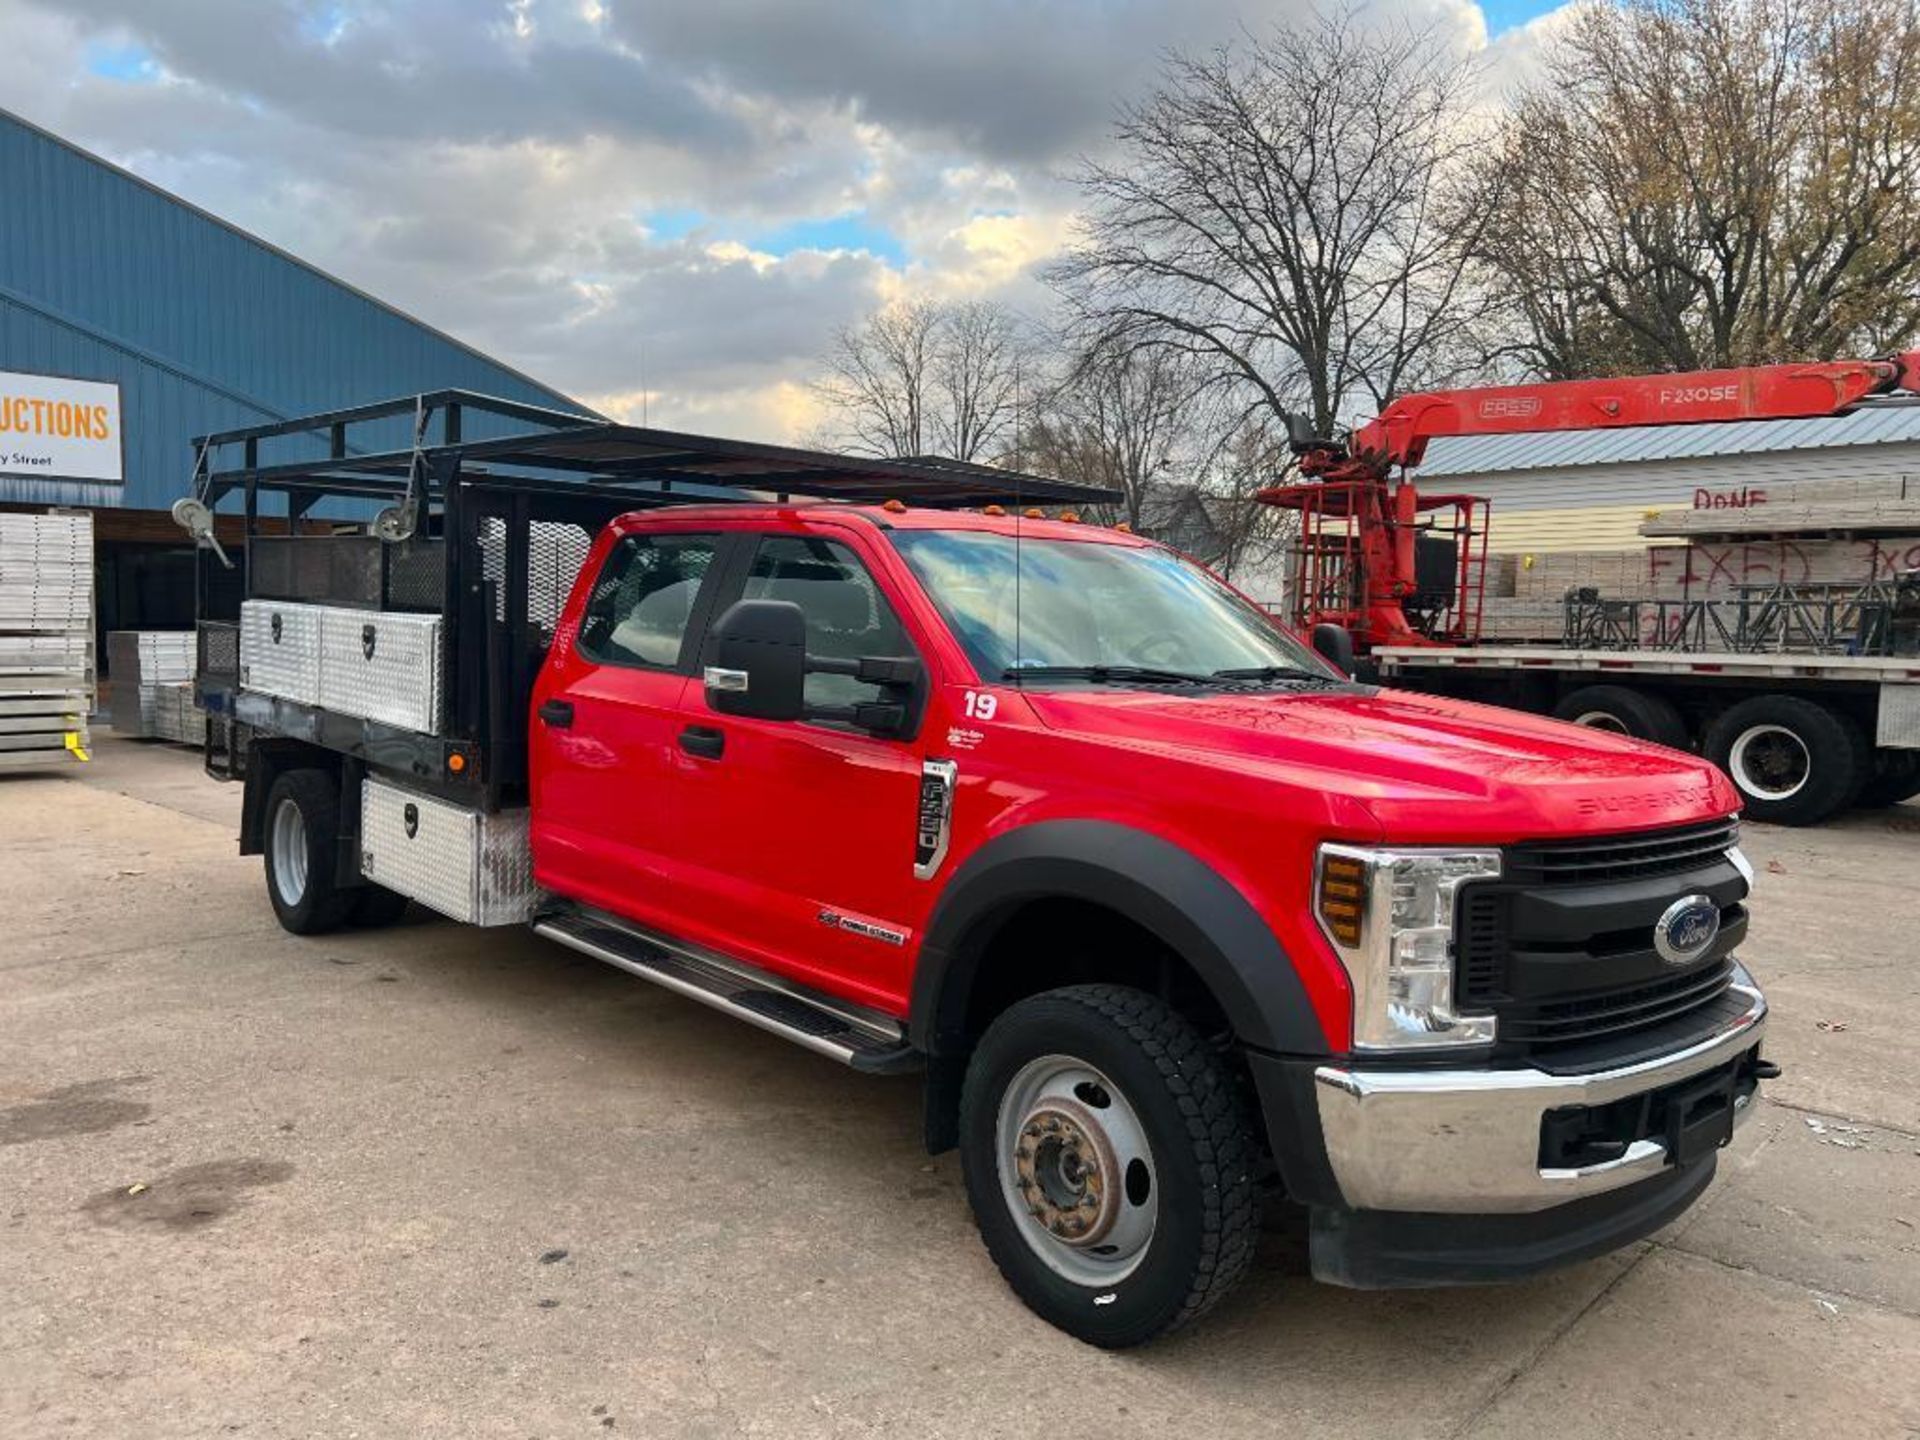 2019 Ford F550 4X4 Crew Cab Truck, VIN #1FD0W5HT1KEE51904, Miles 111,556, 6-Speed Automatic Transmis - Image 2 of 29